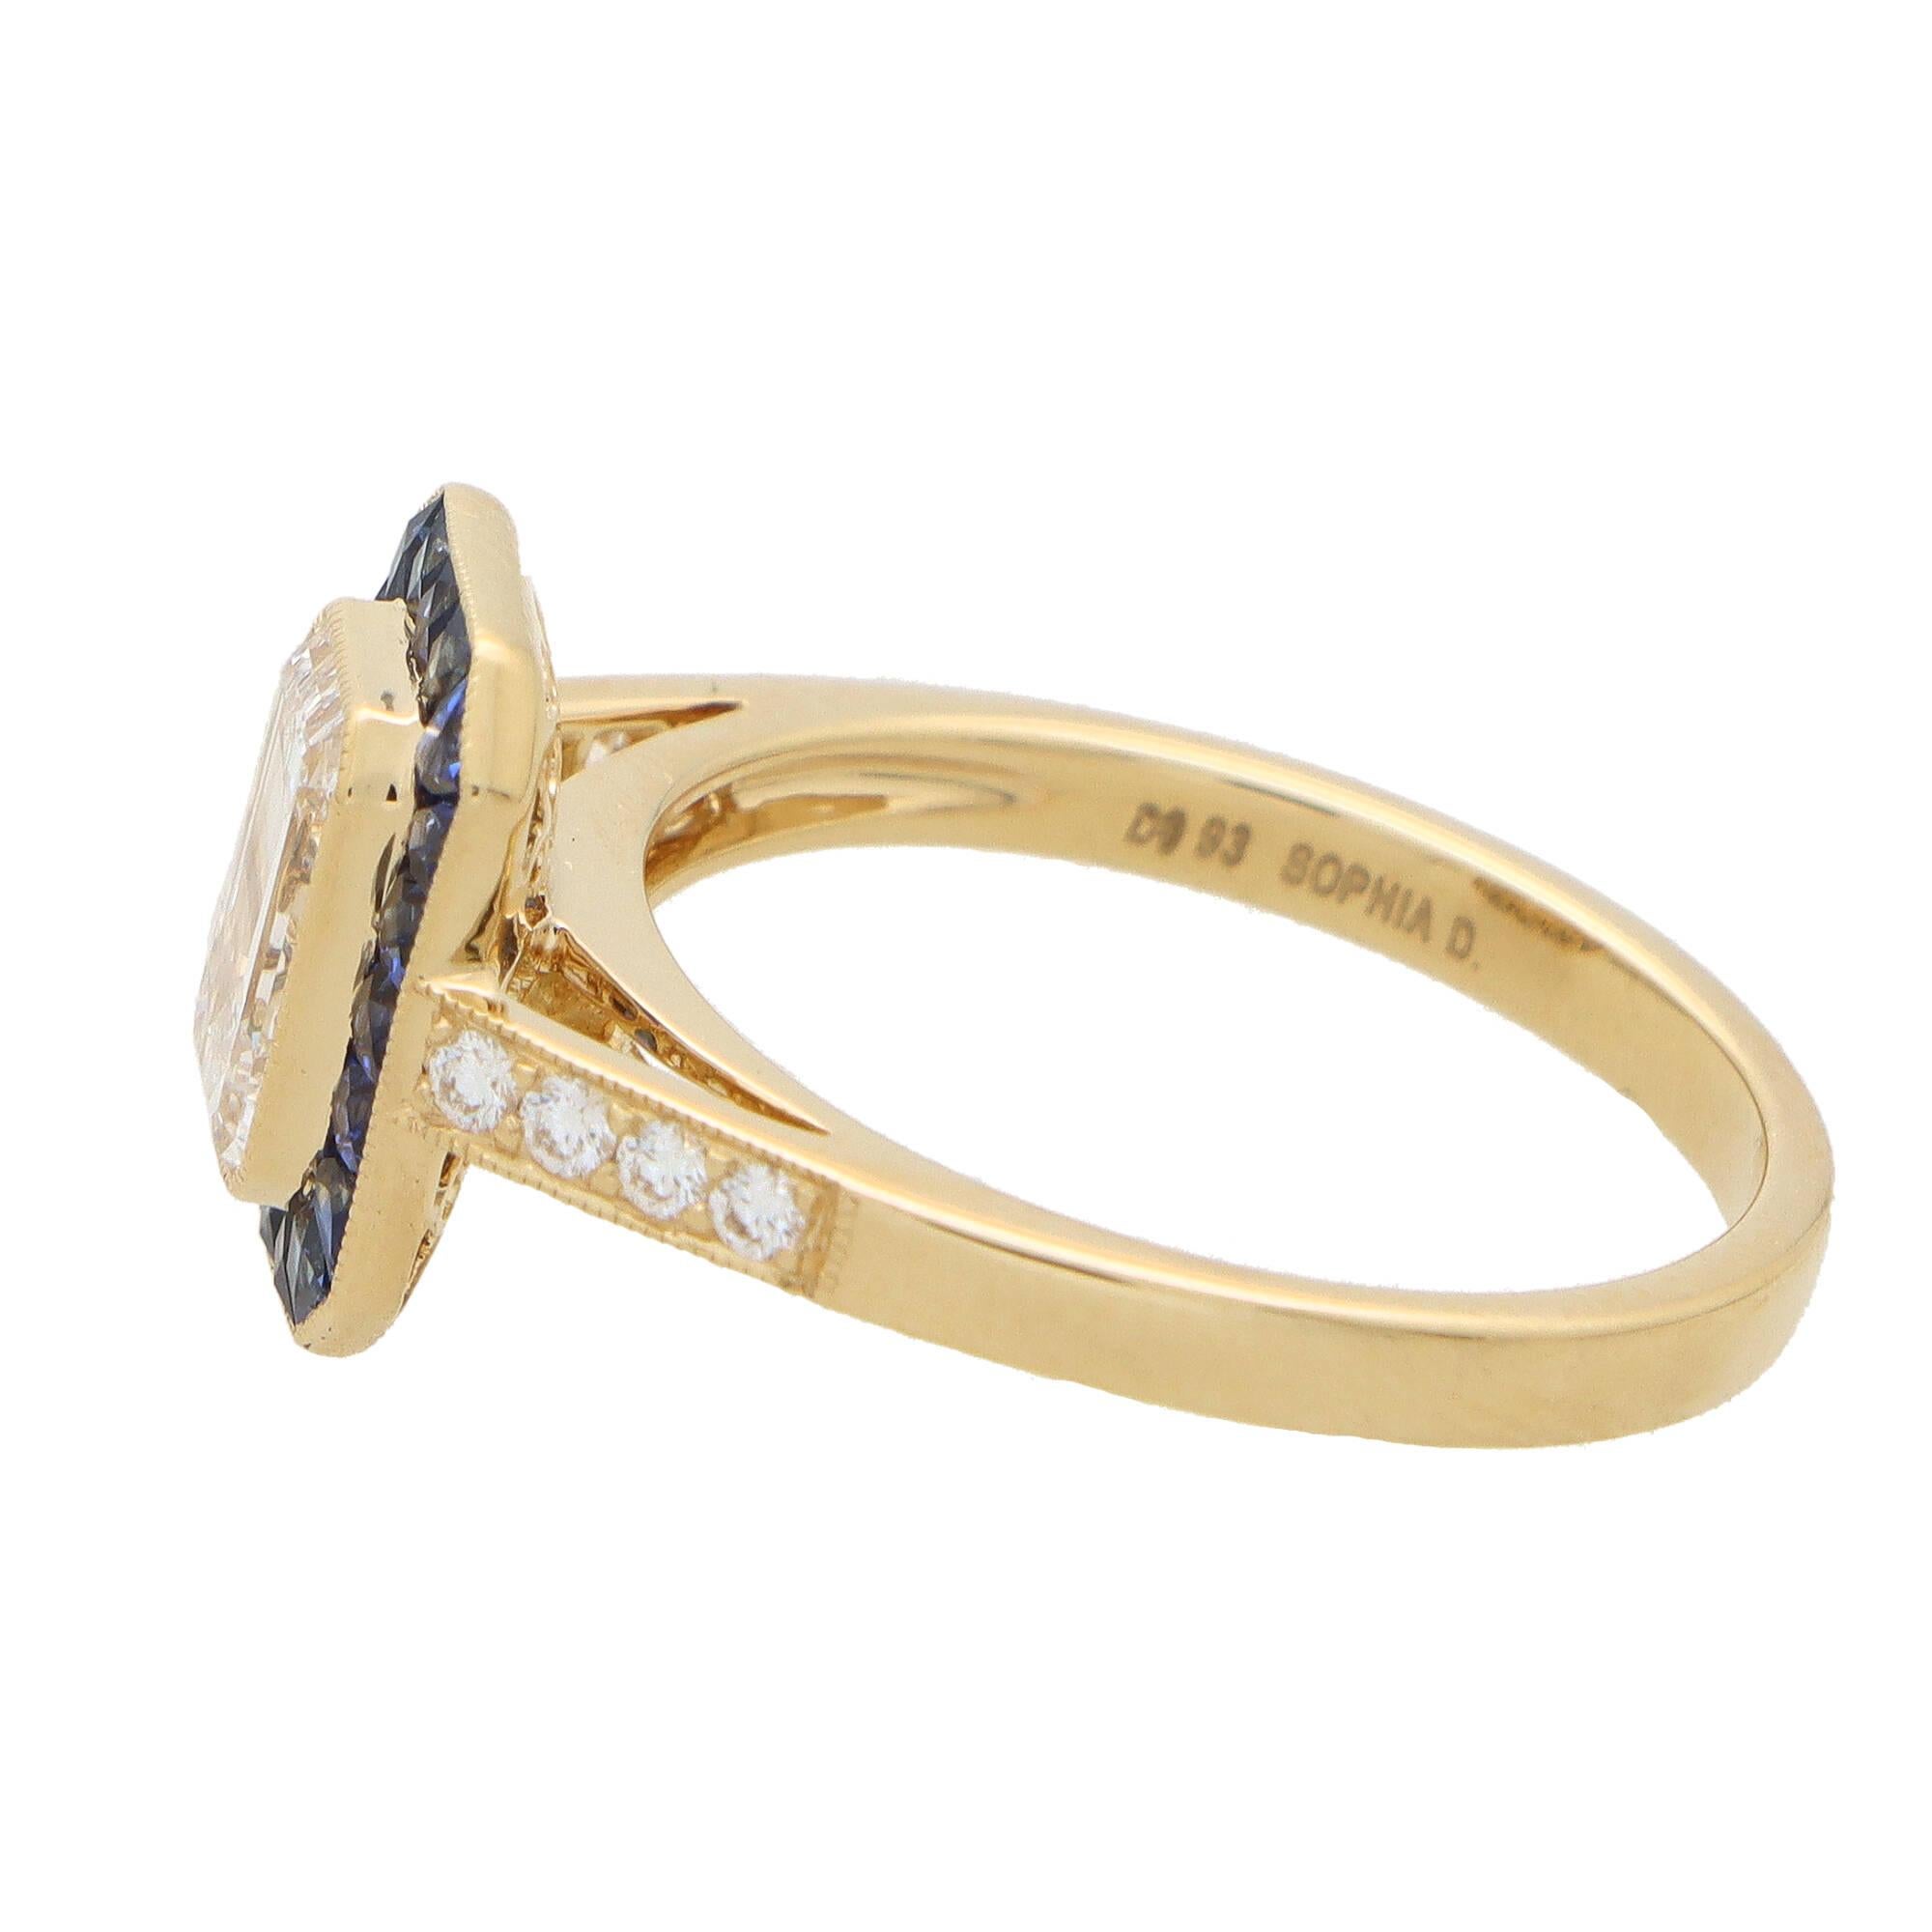 A rather unique Art Deco inspired GIA certified sapphire and diamond target ring set in 18k yellow gold.

The ring is predominantly set with a sparkly GIA certified D-coloured emerald cut diamond which is bezel set securely to centre. Surrounding